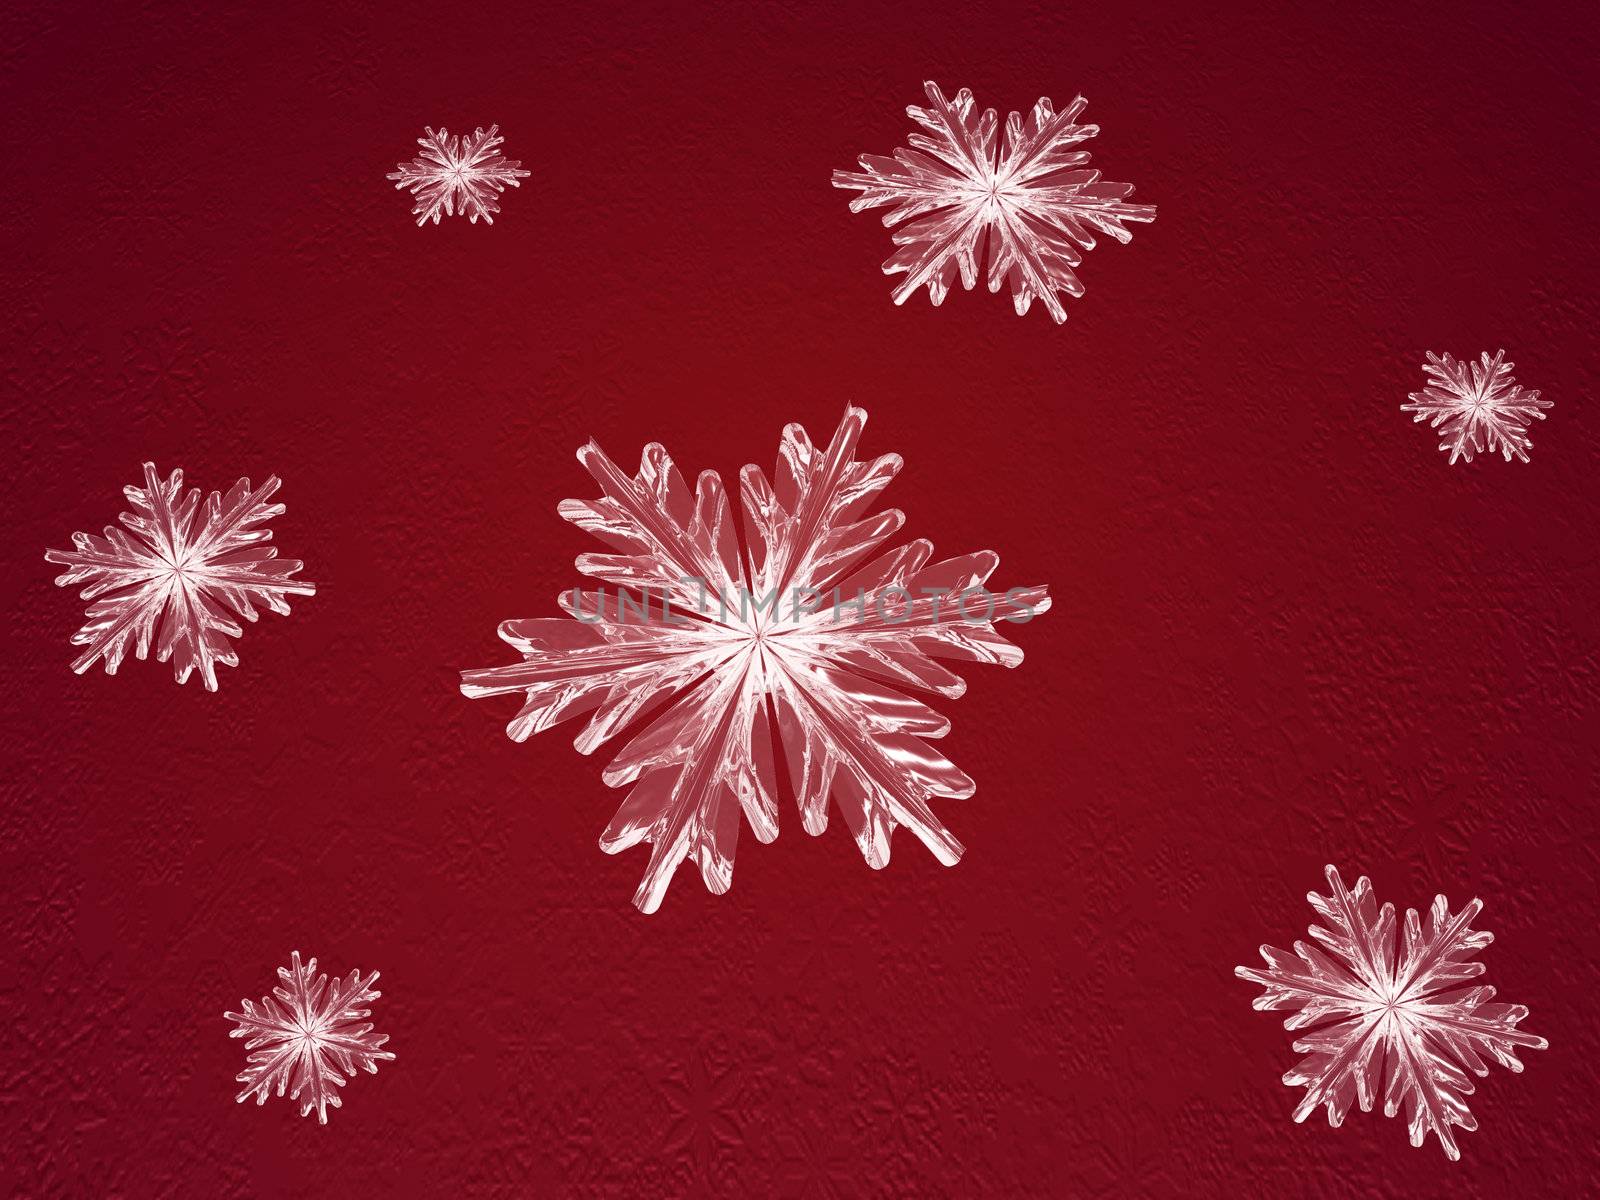 crystal snowflakes in red by marinini